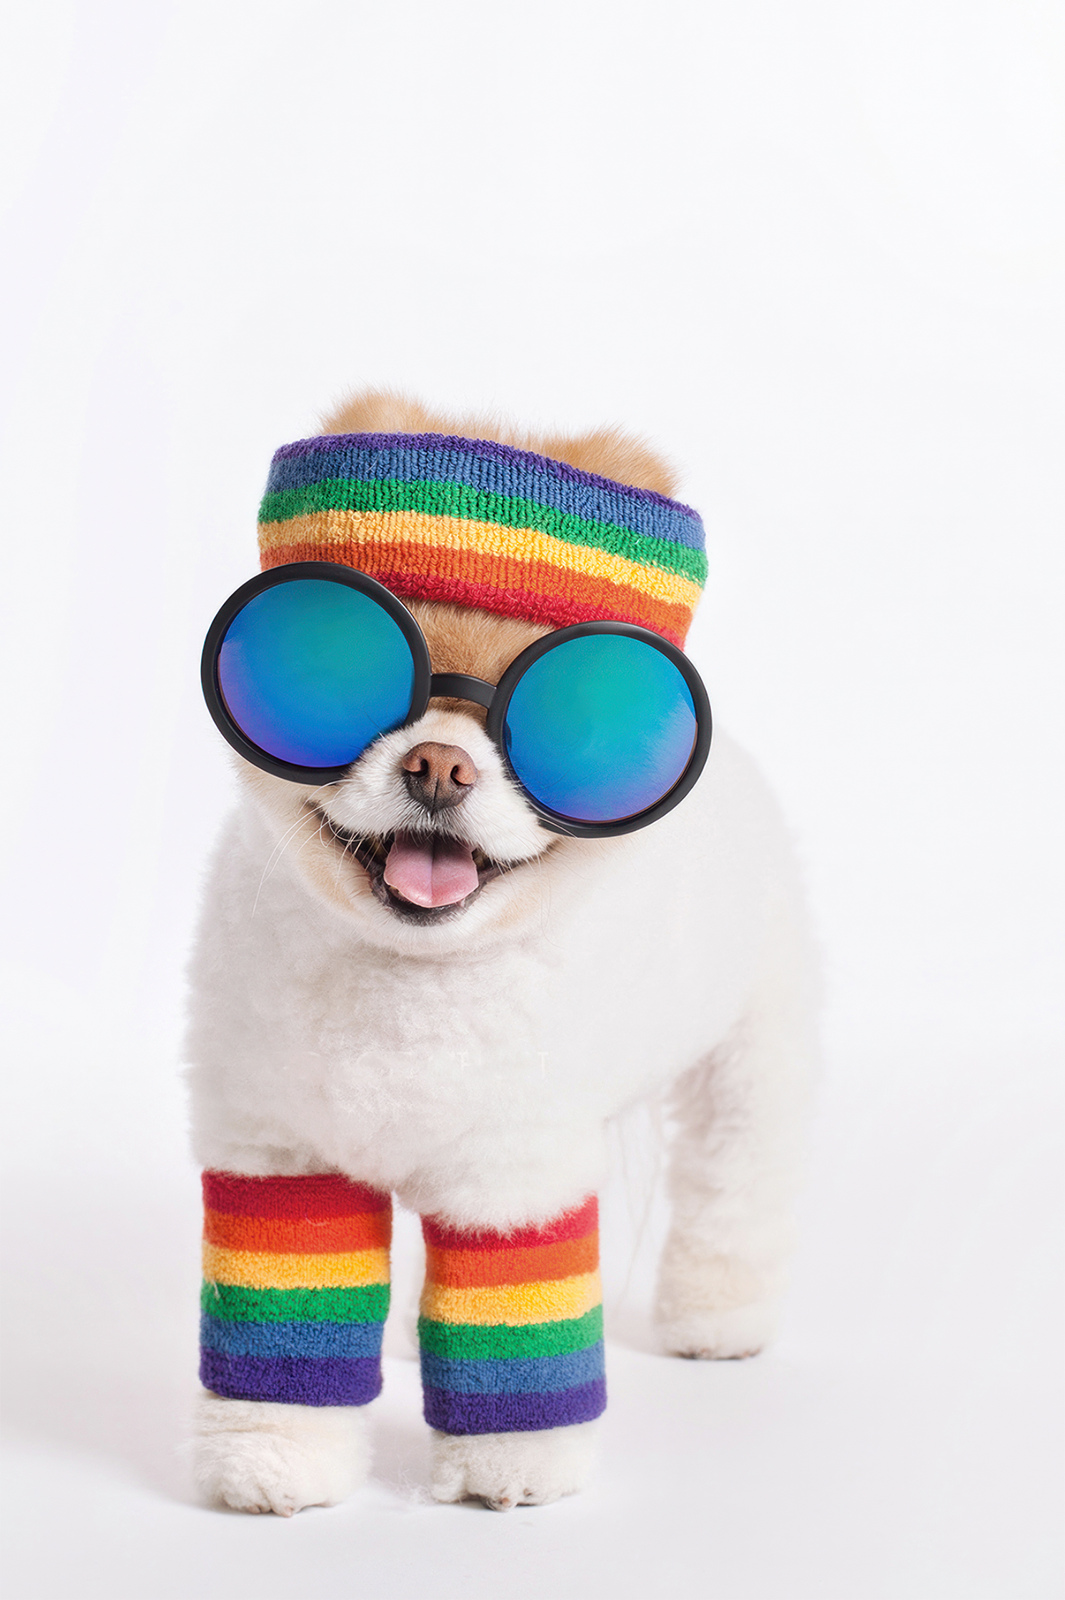 A small, fluffy dog wearing a rainbow-colored headband and leg warmers. The dog also sports large, round blue sunglasses and is standing on a white background, looking happy with its tongue out.